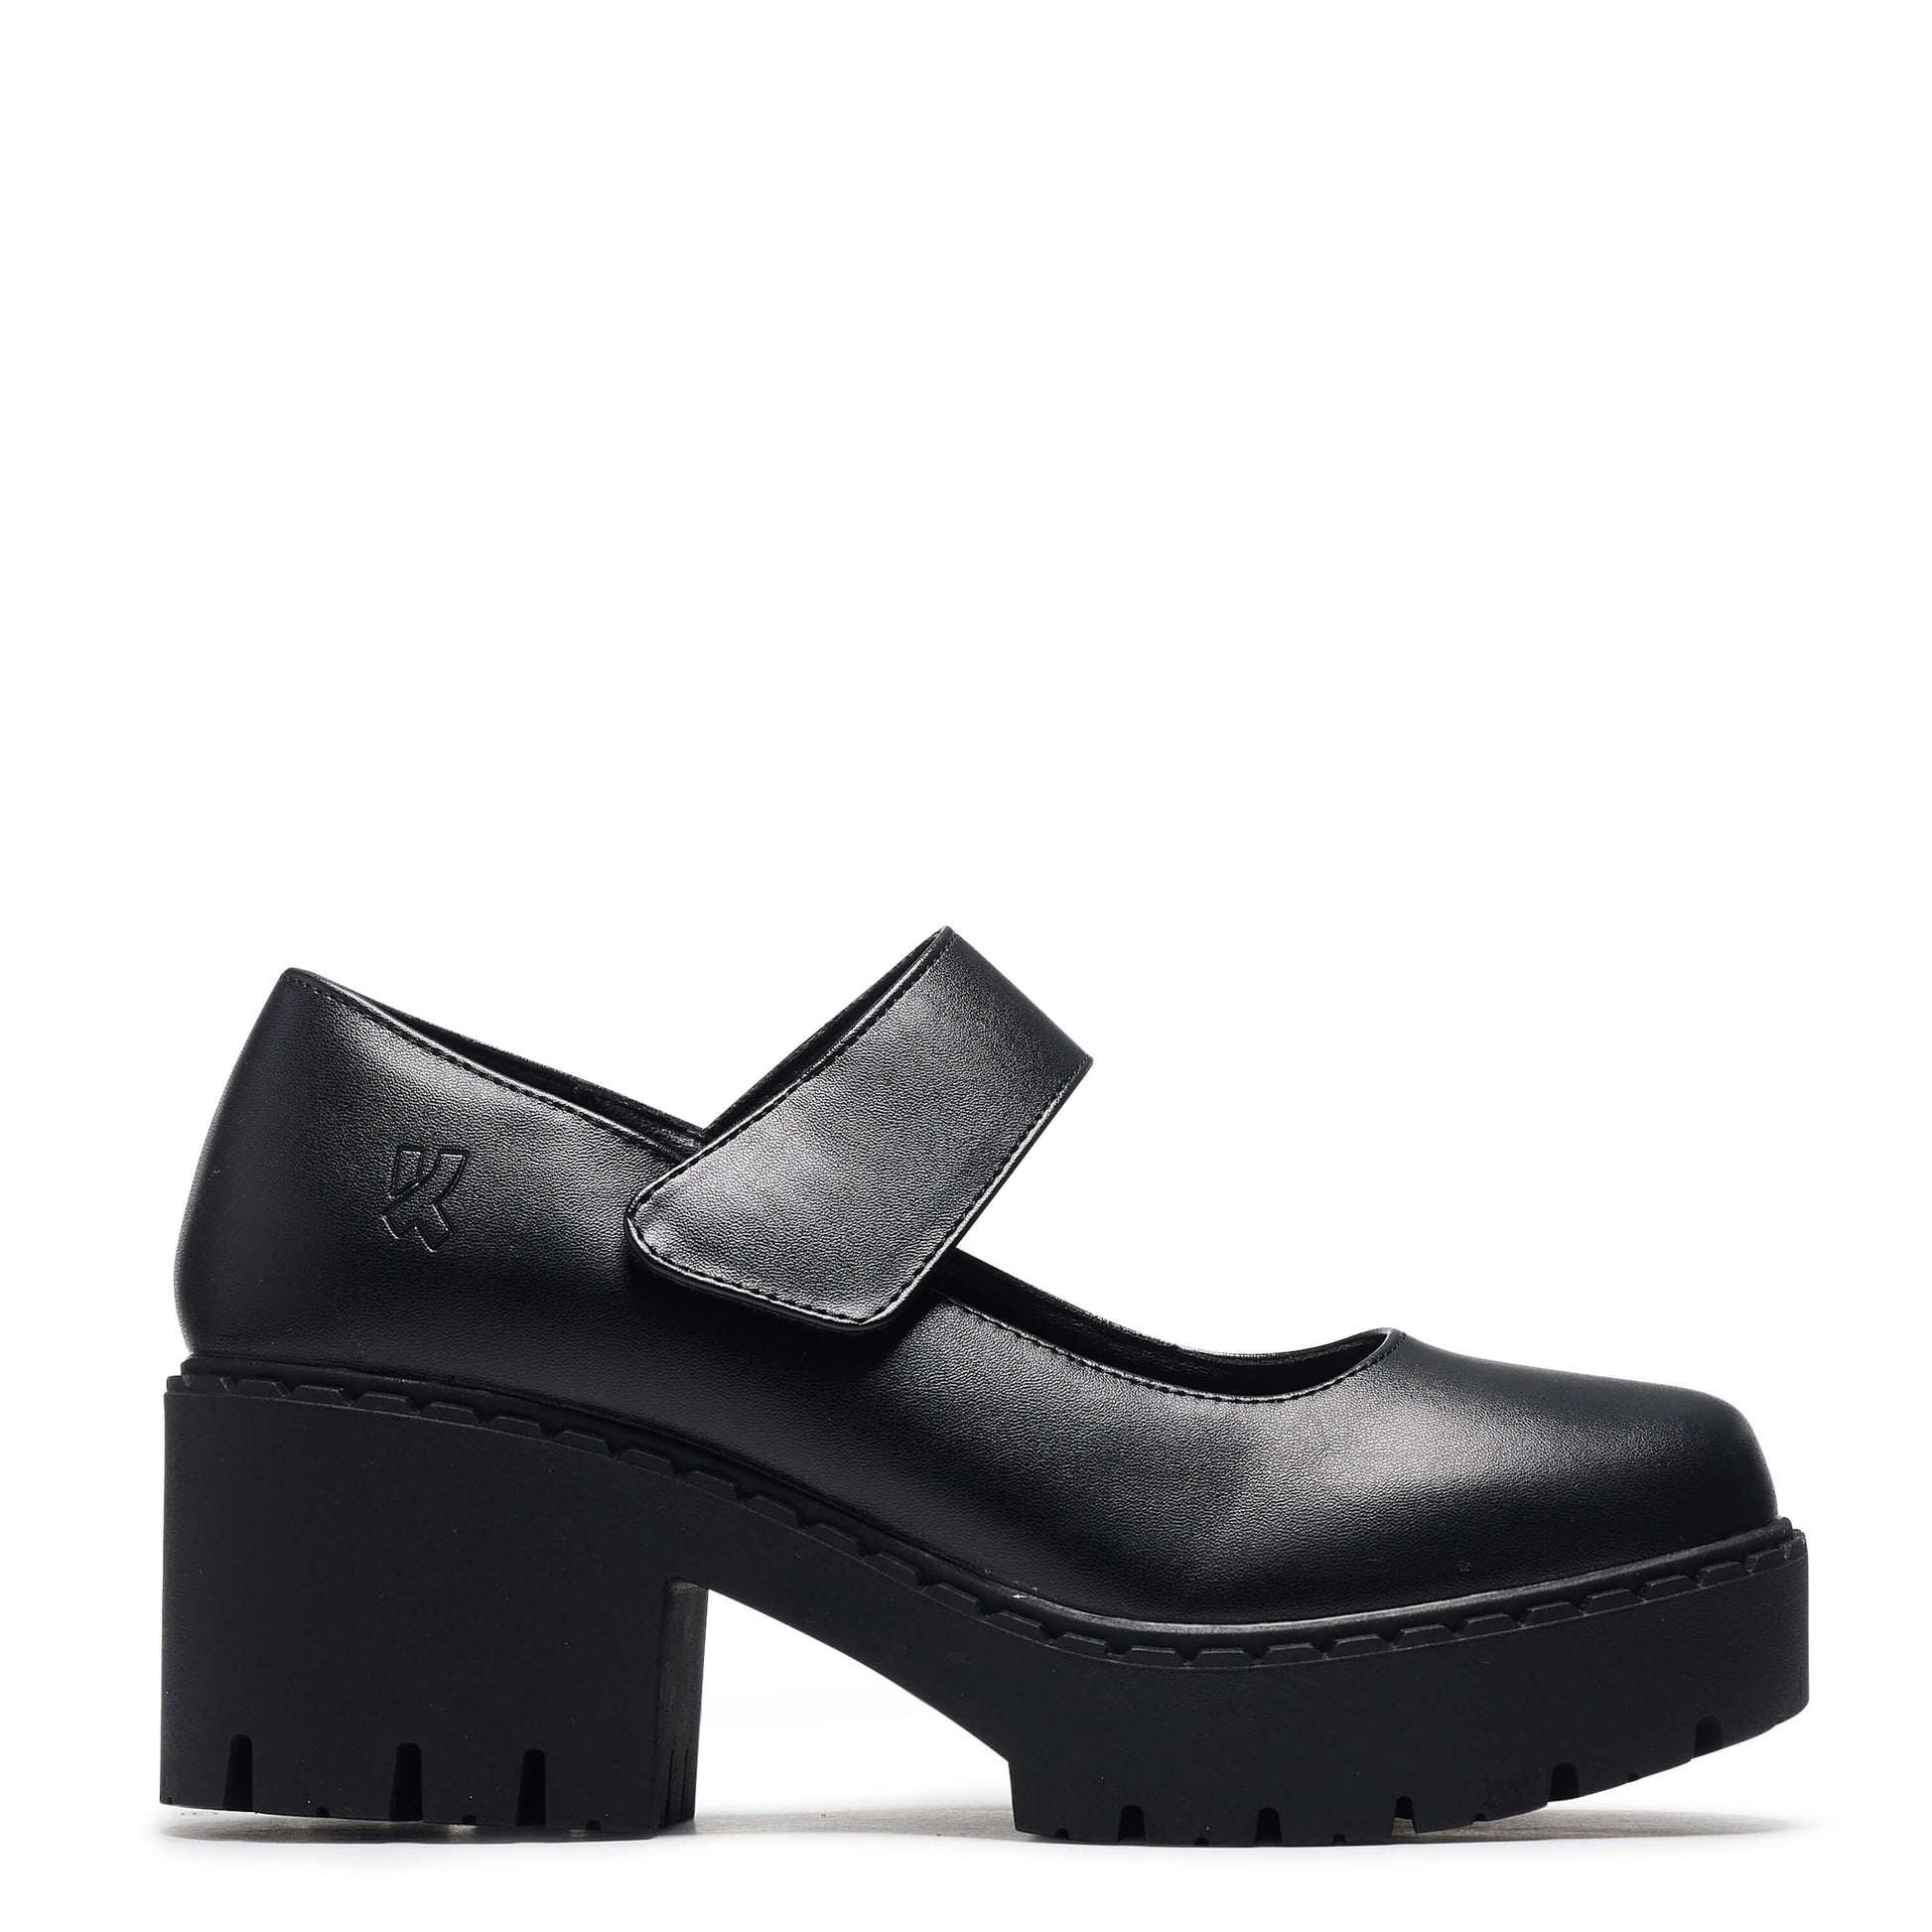 Beacons Switch Mary Jane Shoes - Mary Janes - KOI Footwear - Black - Side View